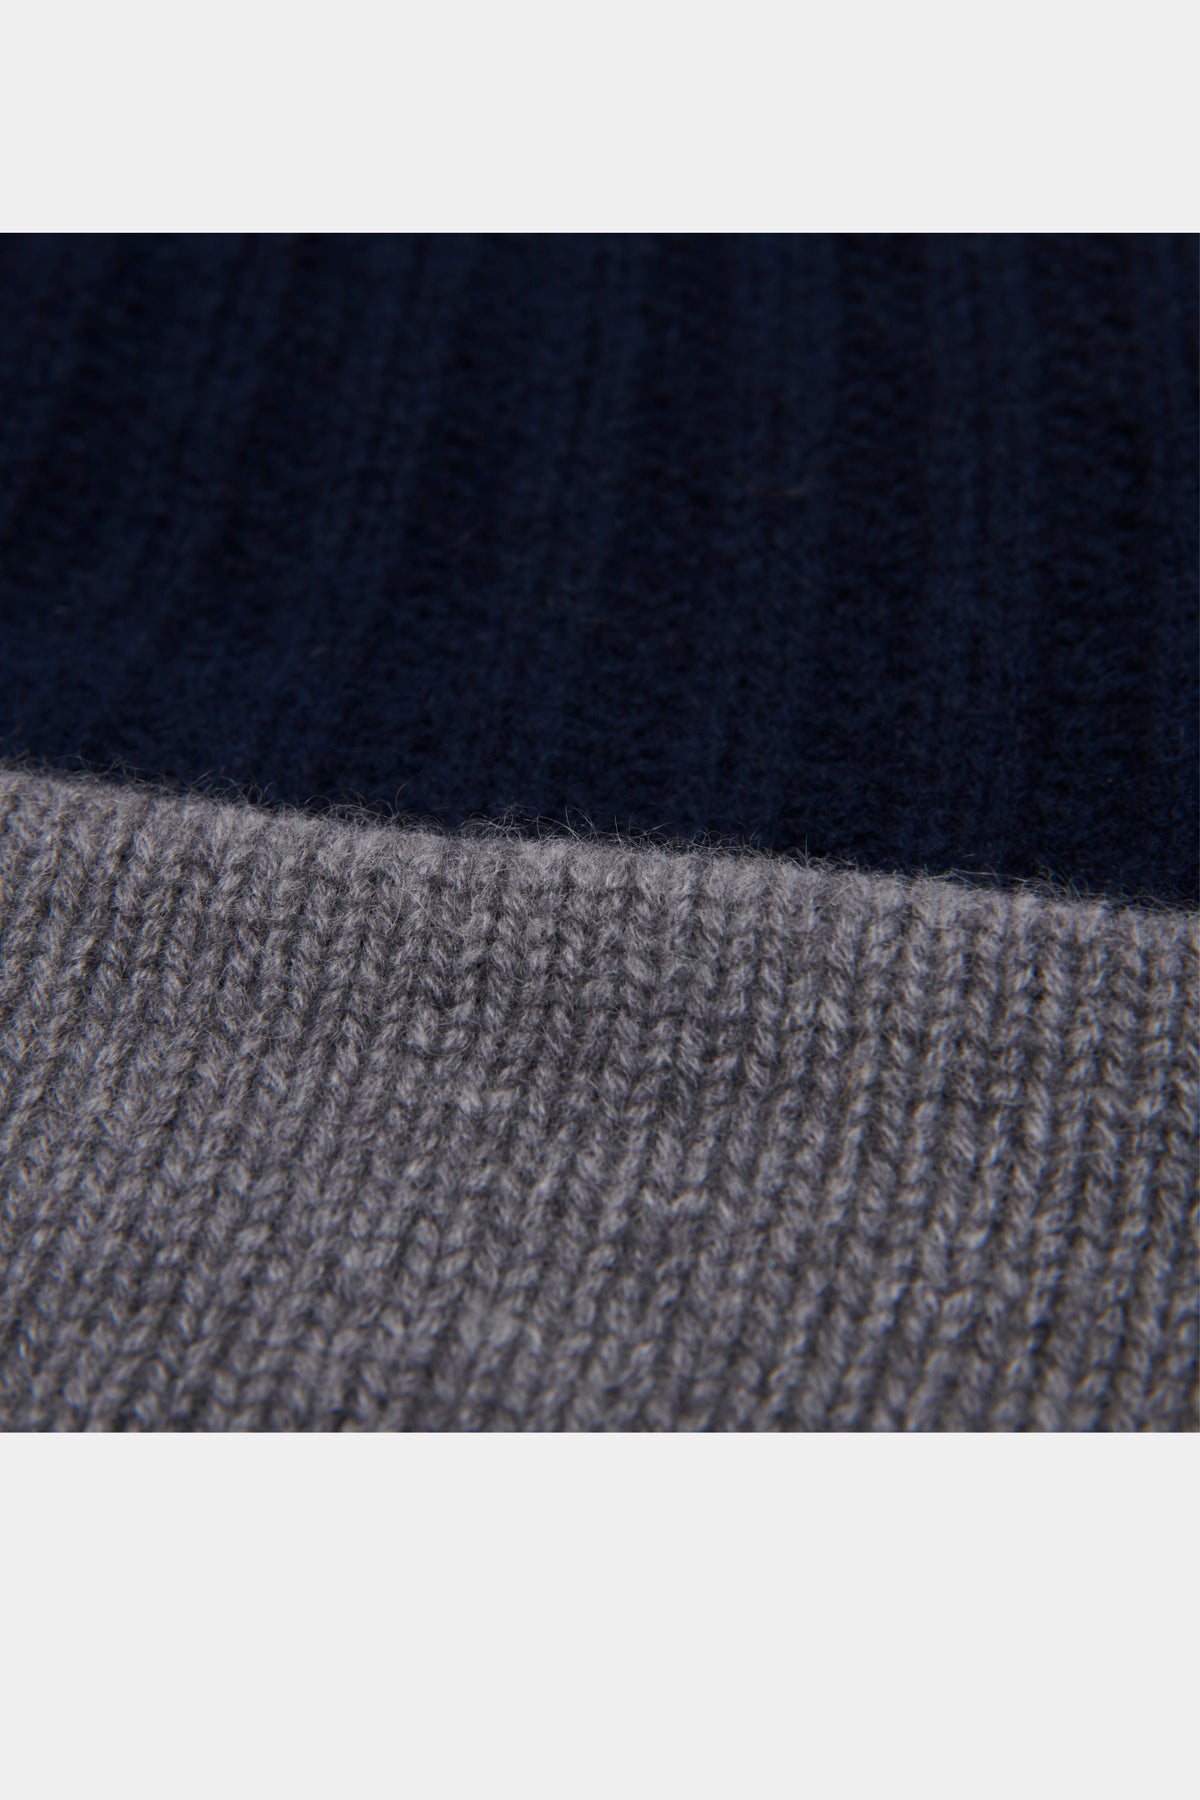 Pure Cashmere Beanies Cozy Warm for Winter